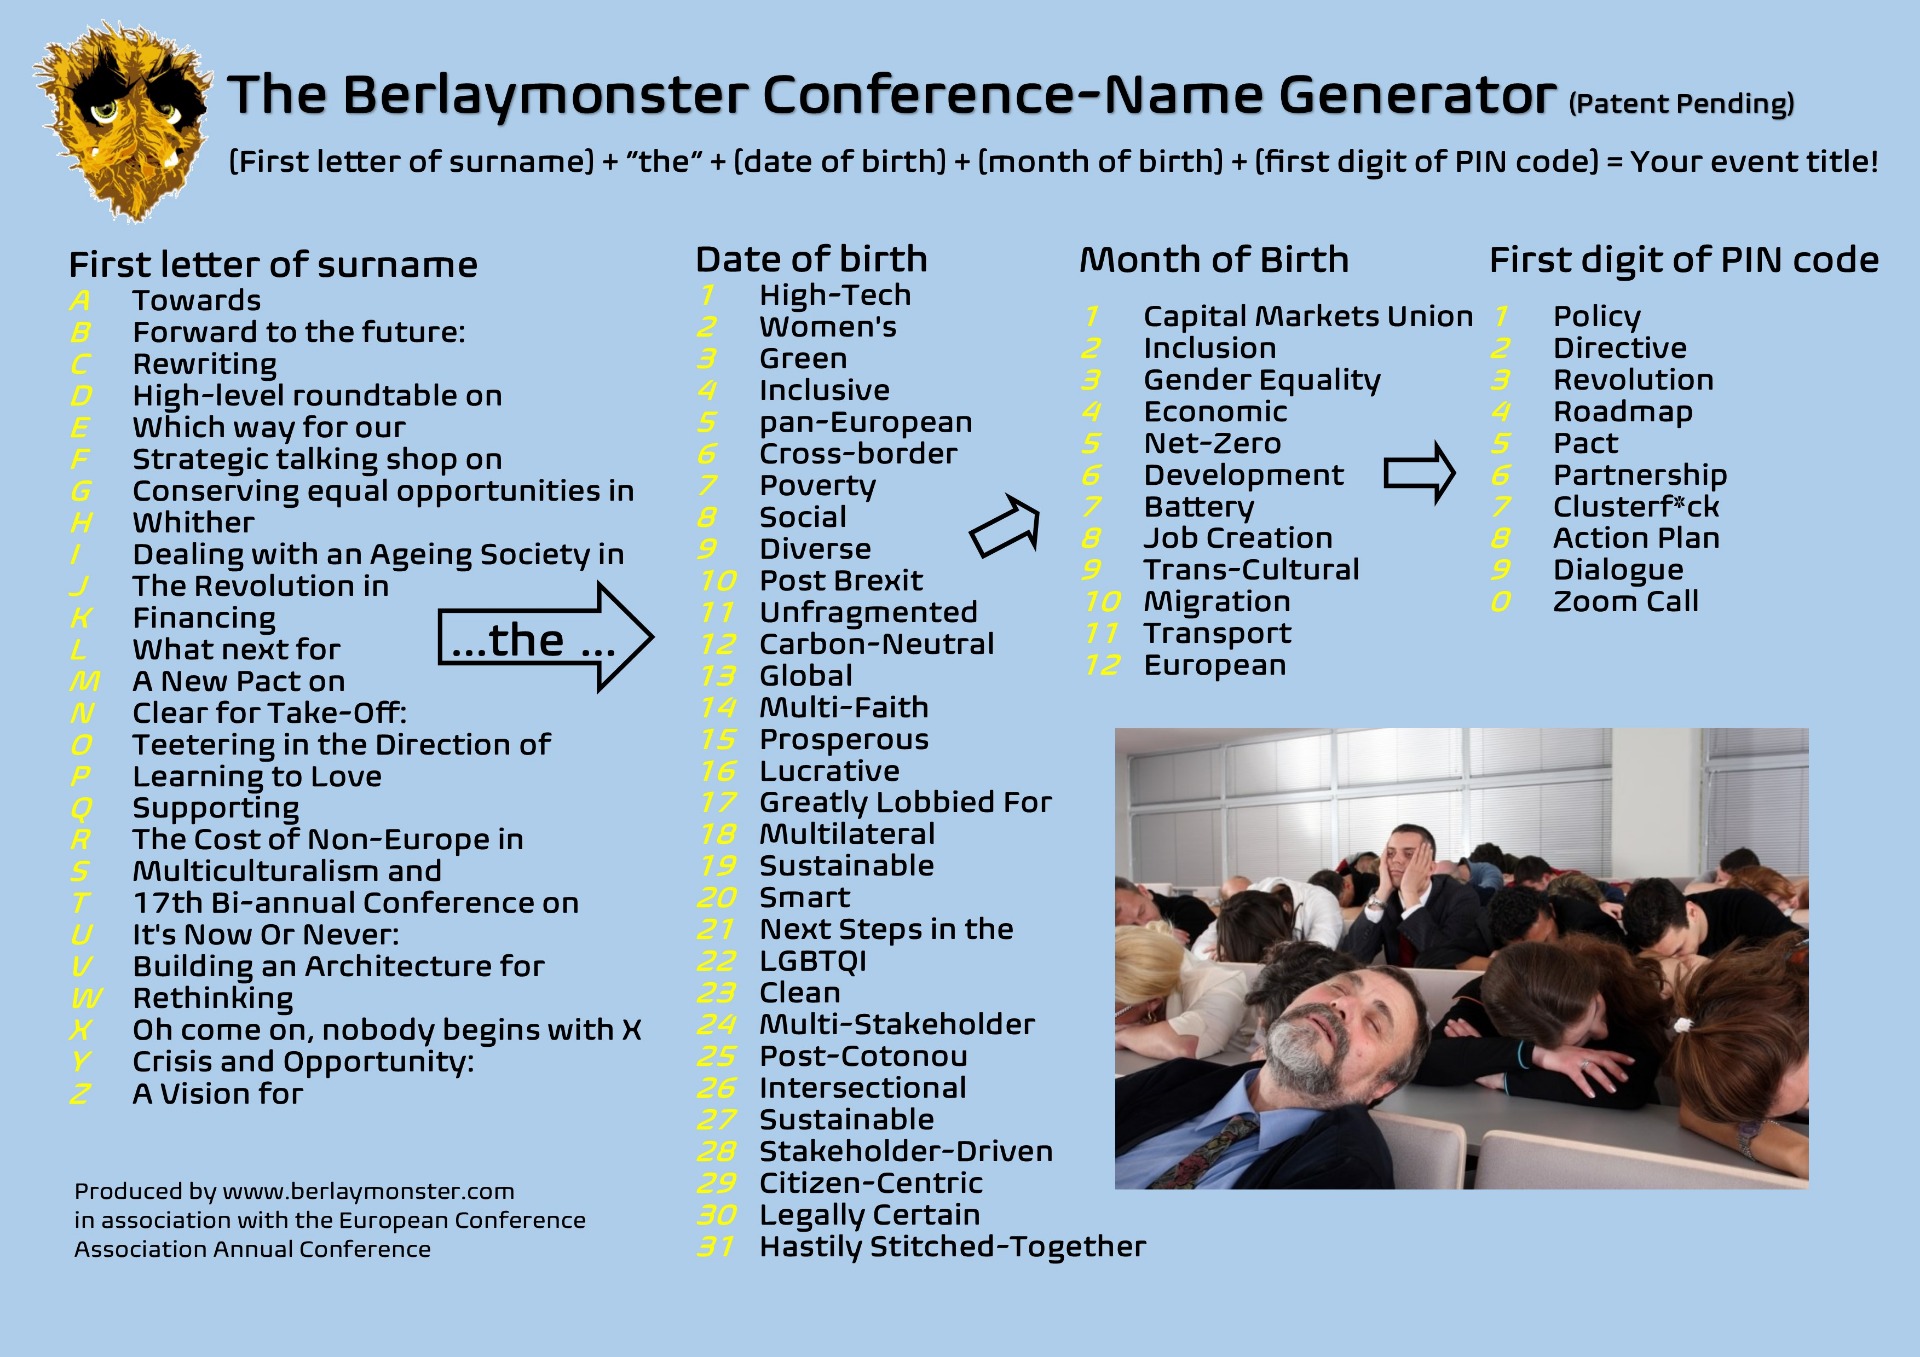 Berlaymonster on Twitter: "Brussels events organisers: stuck for a name for  your upcoming snoozefest? Here's a handy Conference-Name Generator, new,  from Berlaymonster, created by conference veteran @mseltzermayr.  https://t.co/WEuHcYLbcp https://t.co ...